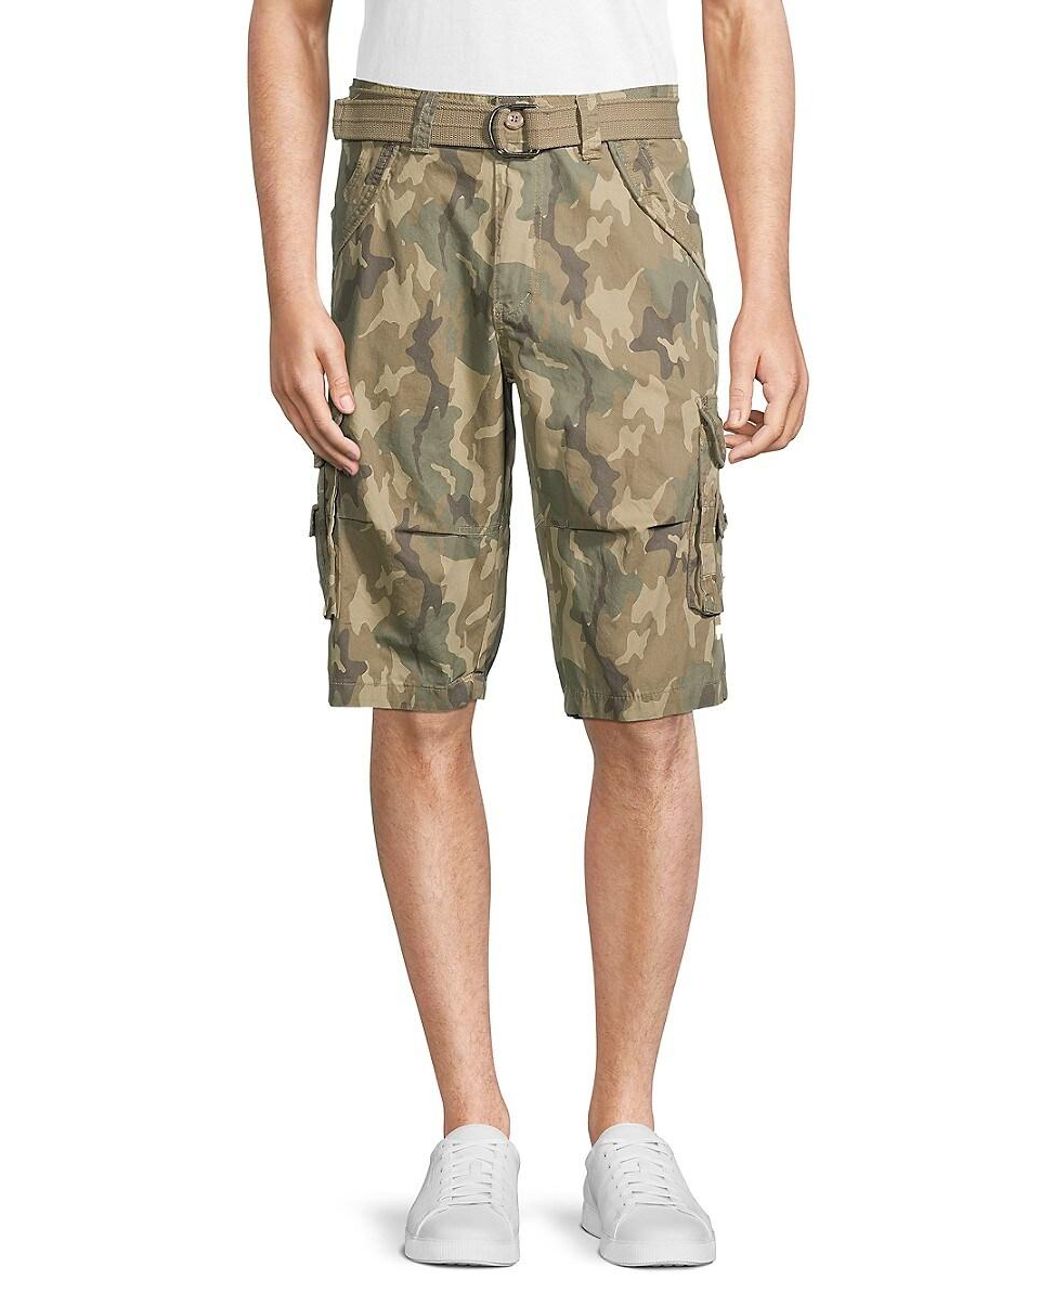 Xray Jeans Camouflage Cotton Cargo Shorts for Men | Lyst